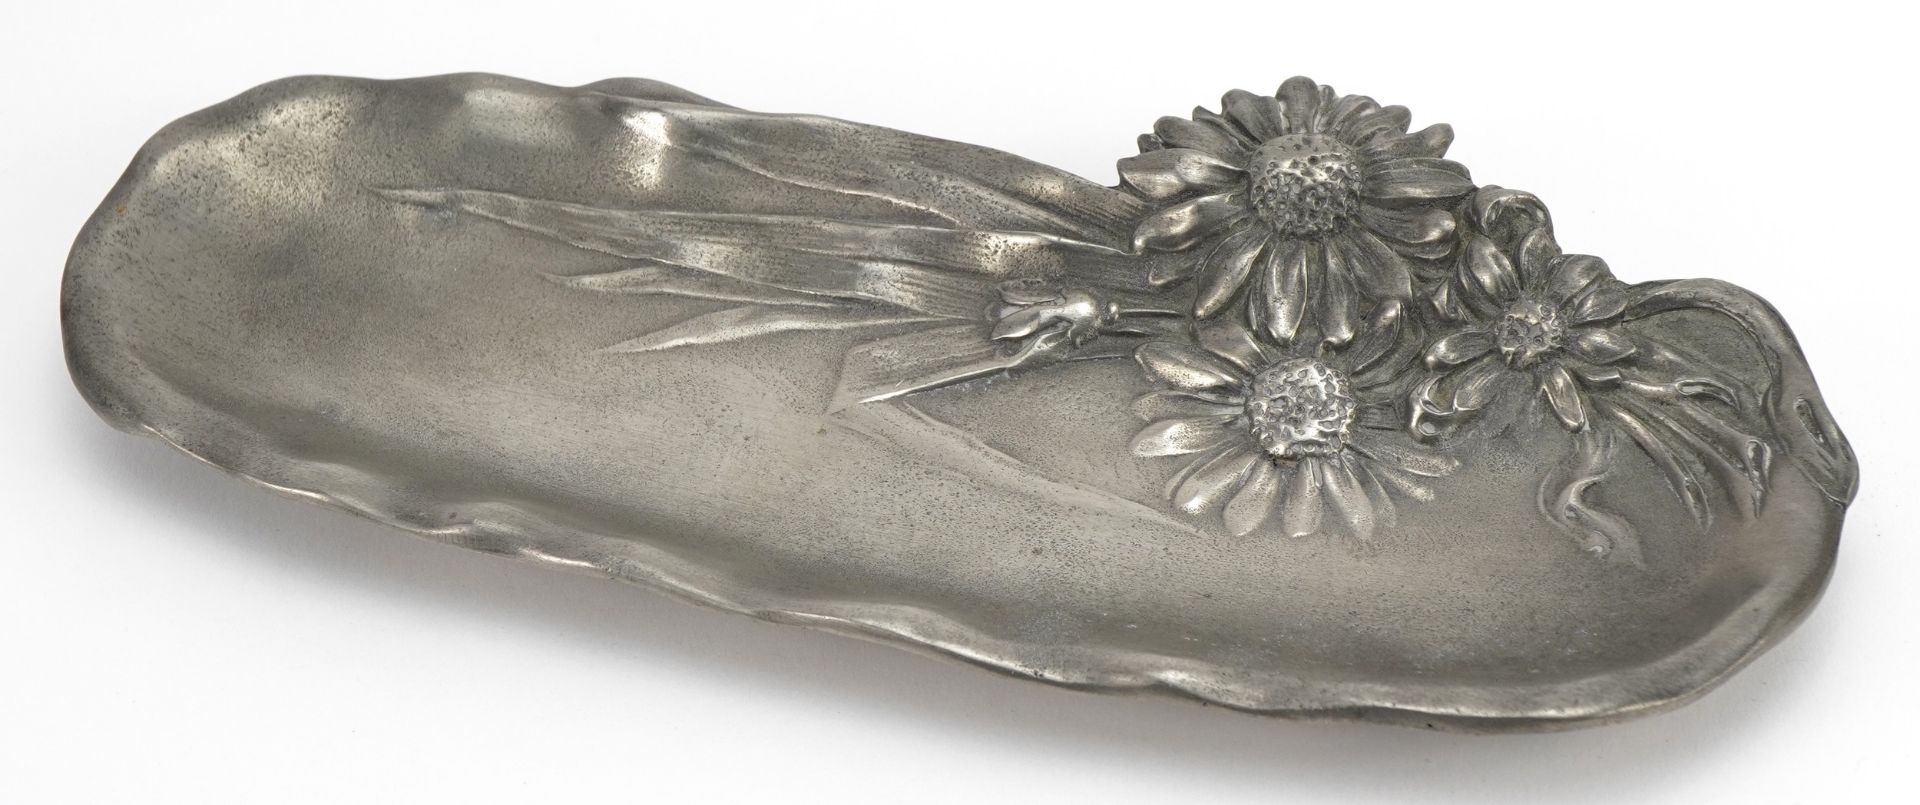 Manner of WMF, German Art Nouveau pewter pen tray decorated in relief with daisies, 22.5cm wide :